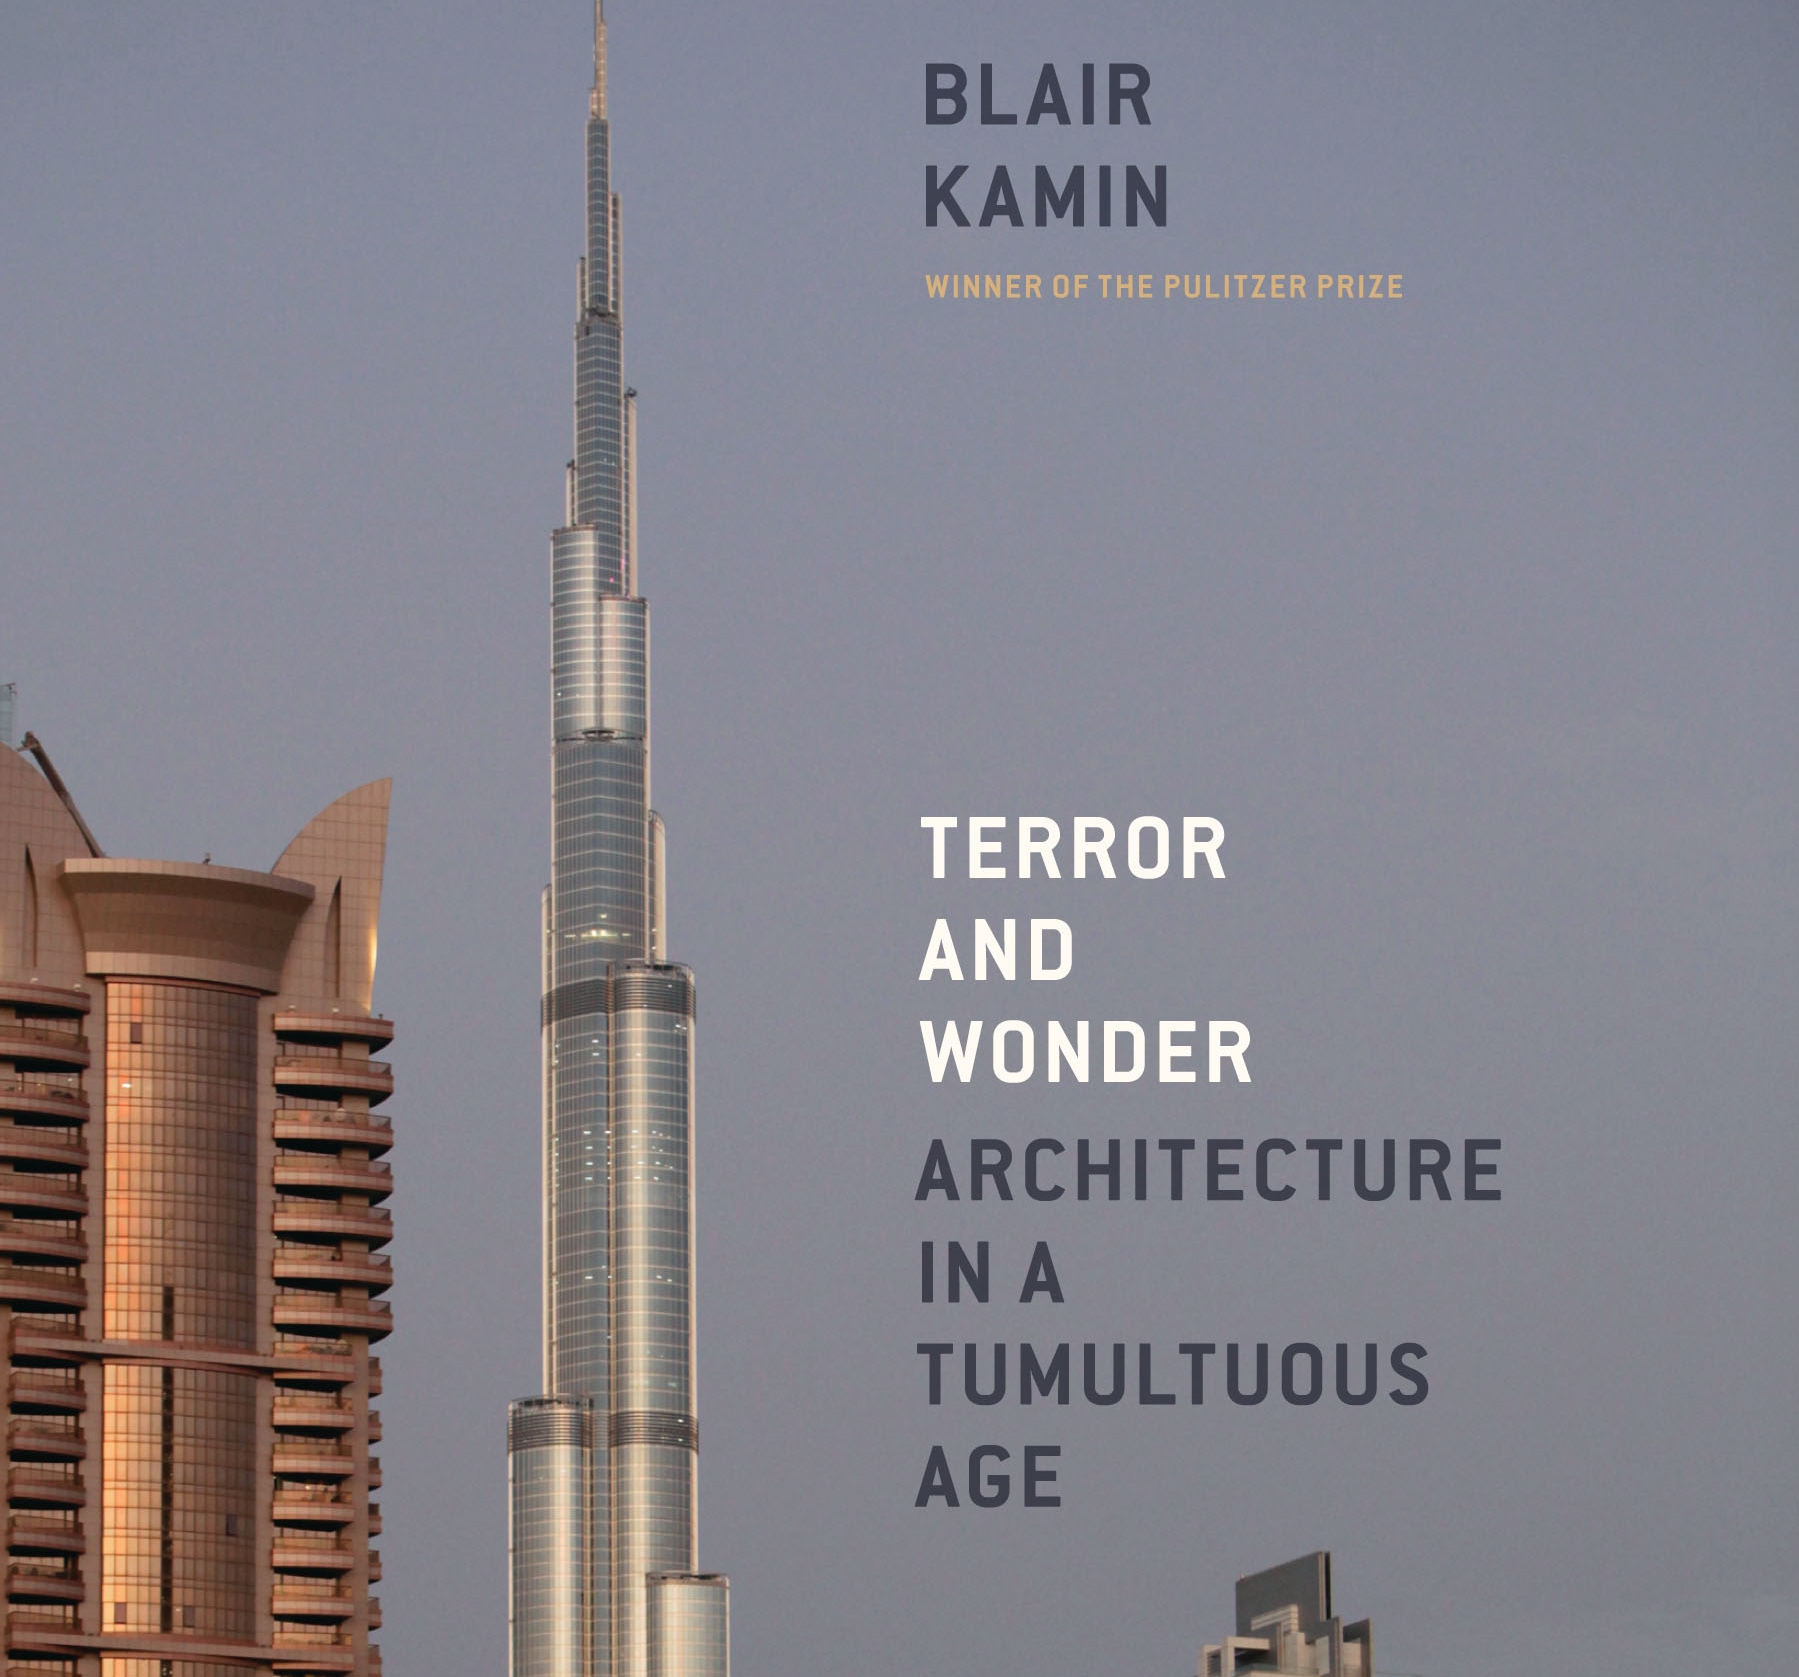 In his new book, “Terror and Wonder: Architecture in a Tumultuous Age,” the Pulitzer Prize-winning critic strives mightily to define architecture during an epoch bracketed by “two great thunderclaps in the sky” – the destruction of the World Trade Center in 2001 and the completion of the world’s tallest building, the Burj Khalifa in Dubai, in 2010.